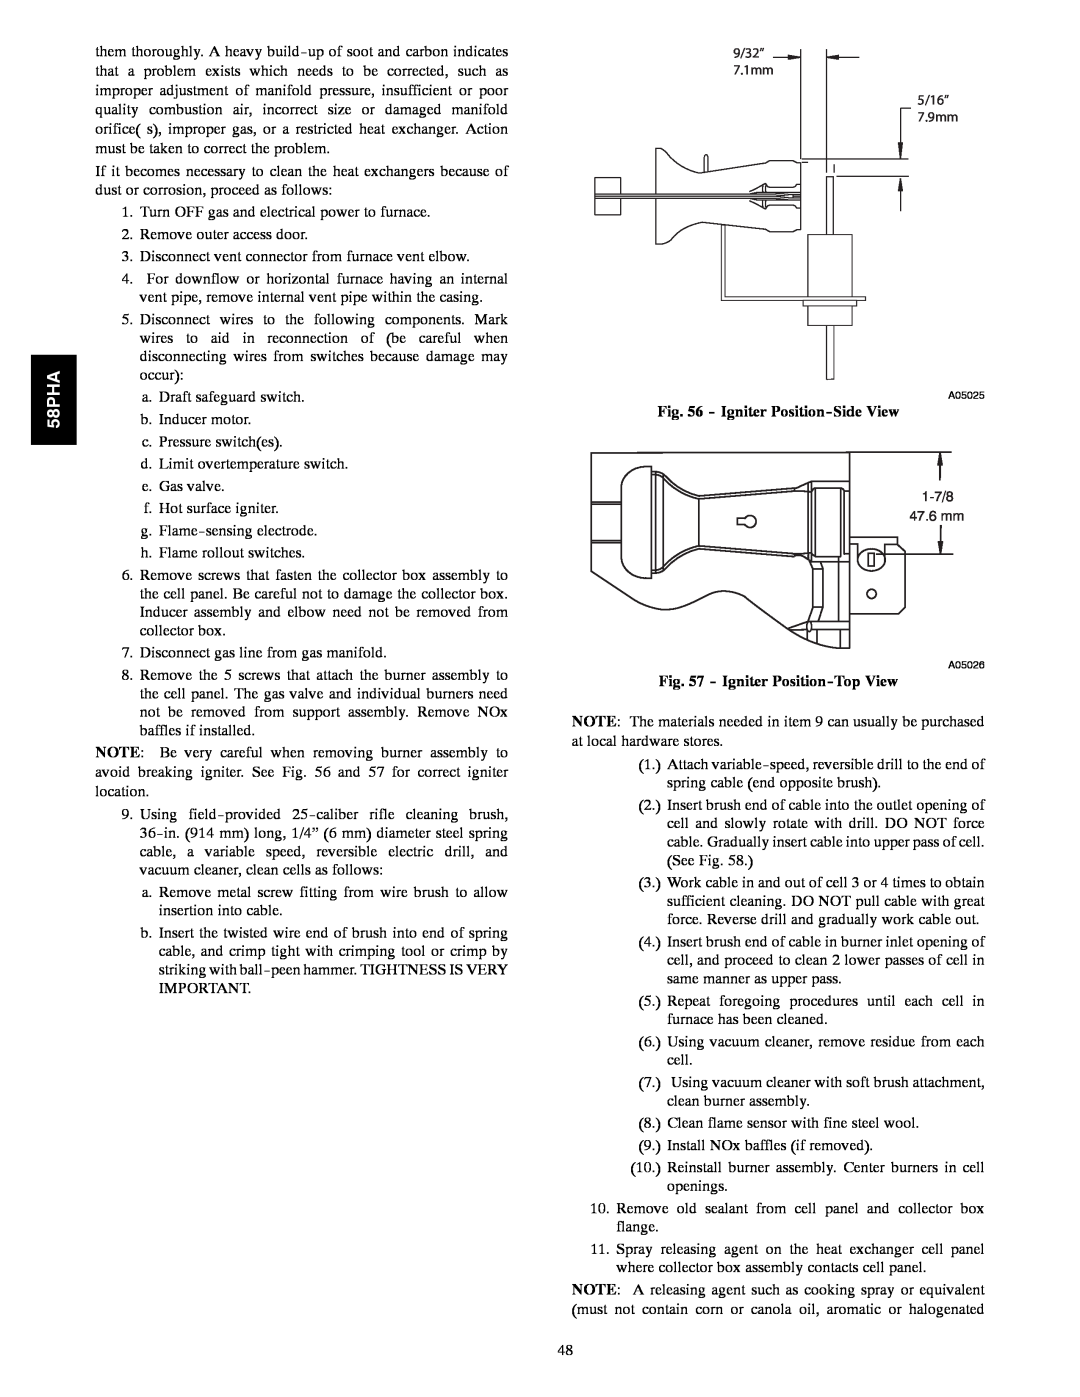 Carrier 58PHA/PHX instruction manual Igniter Position-SideView, Igniter Position-TopView 